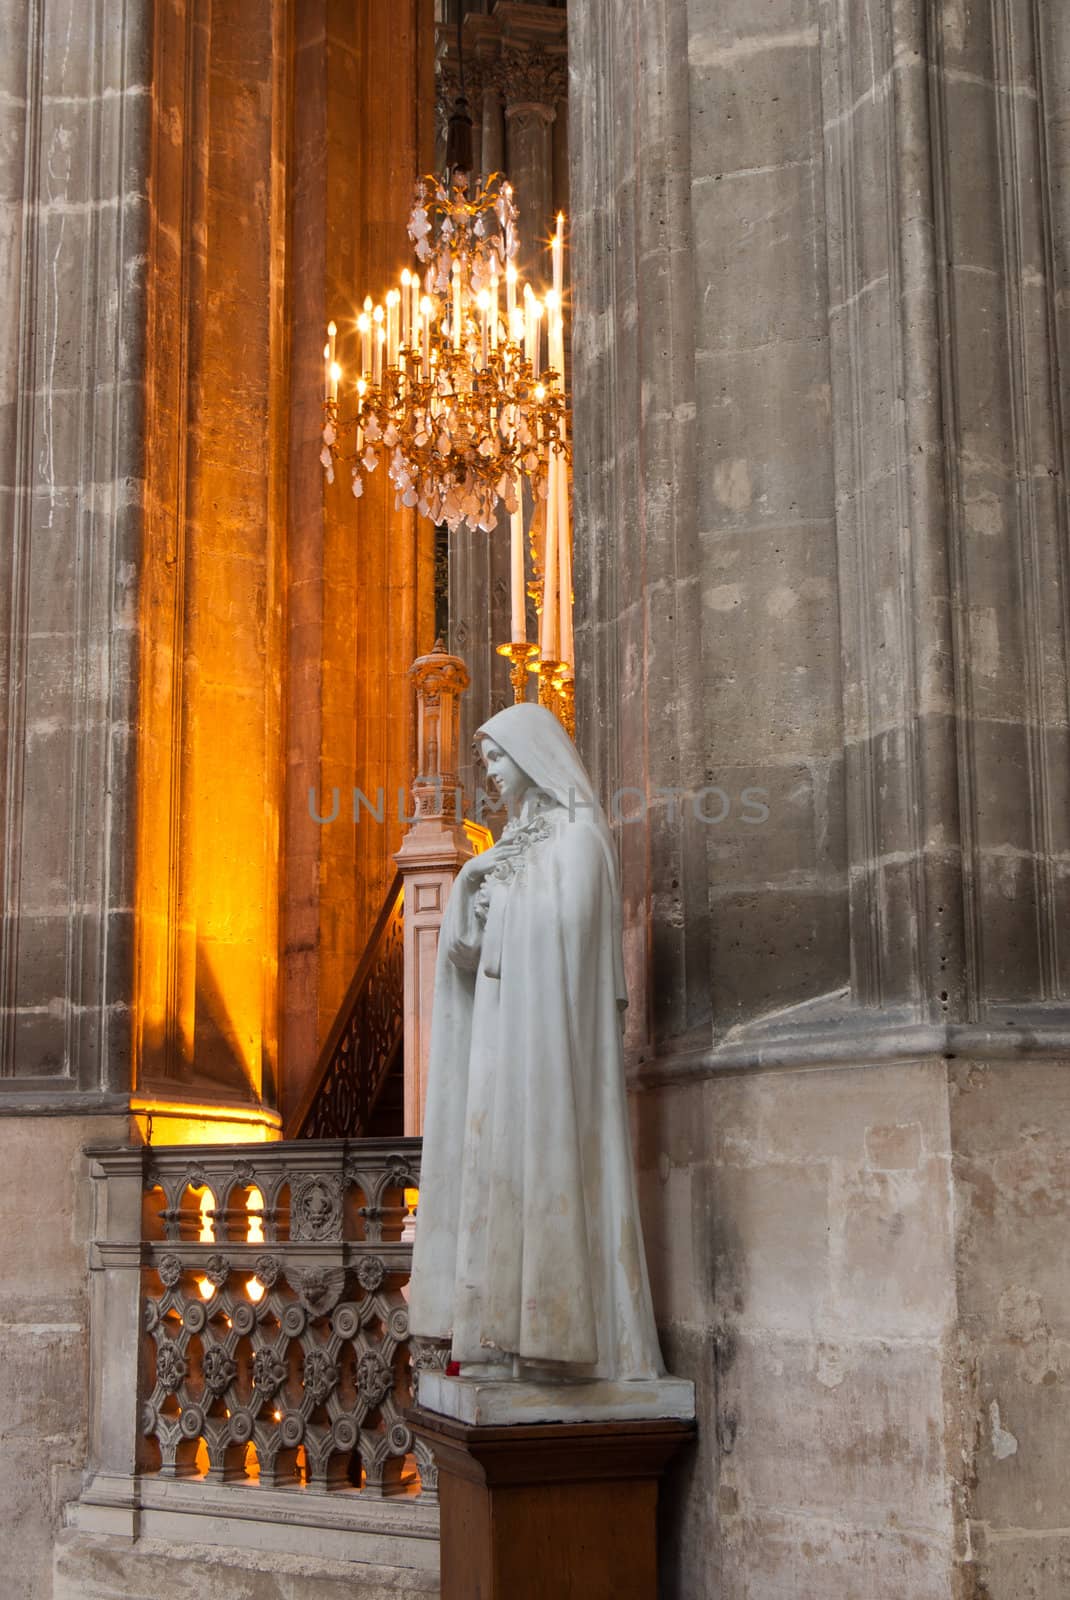 Old statue of Virgin Mary inside the Church in Paris, France